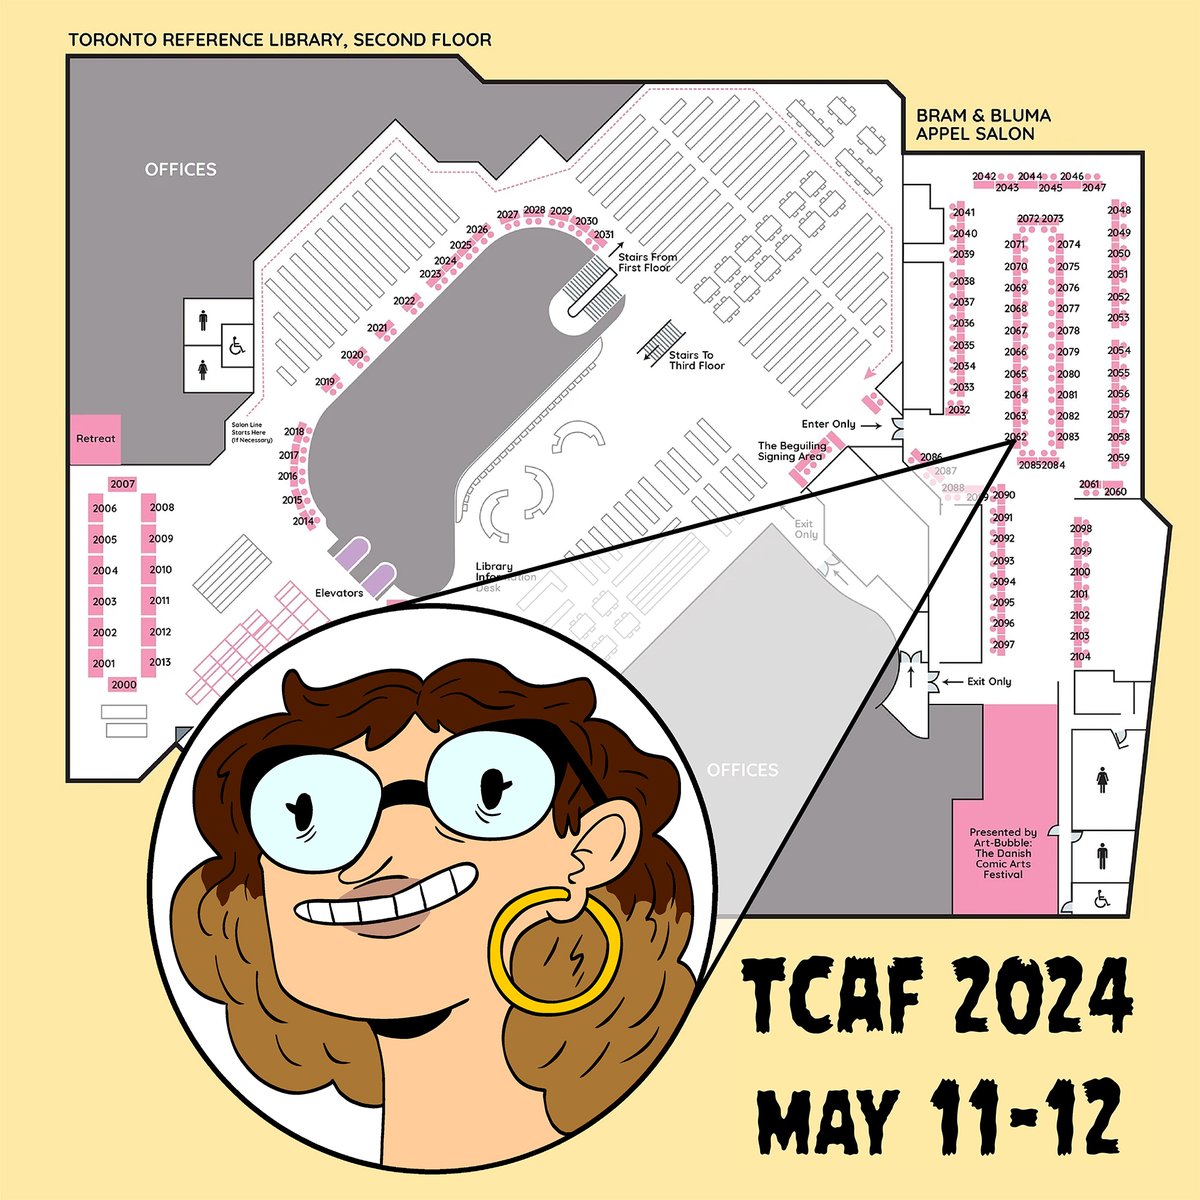 this weekend is @TorontoComics! i'll be at the reference library all weekend, table 2062 on the second floor. come say hello~